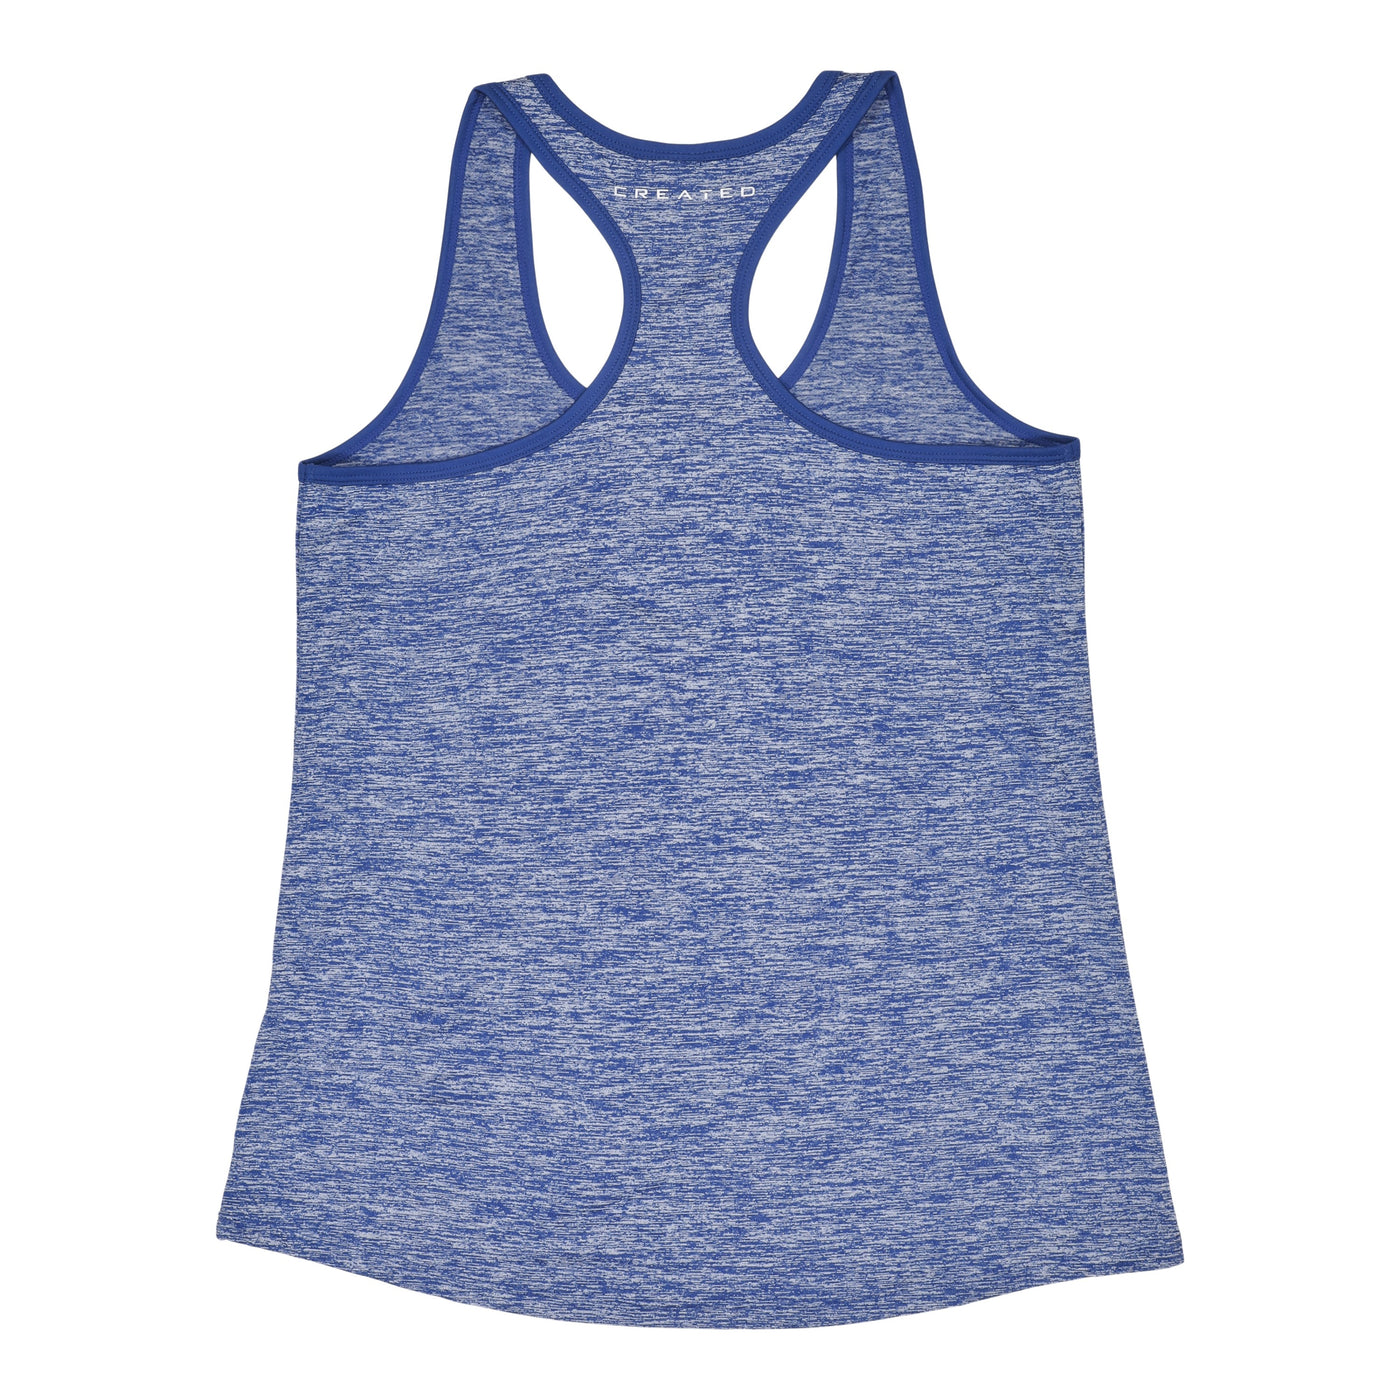 Created Women's Charged ice blue tank top rear view